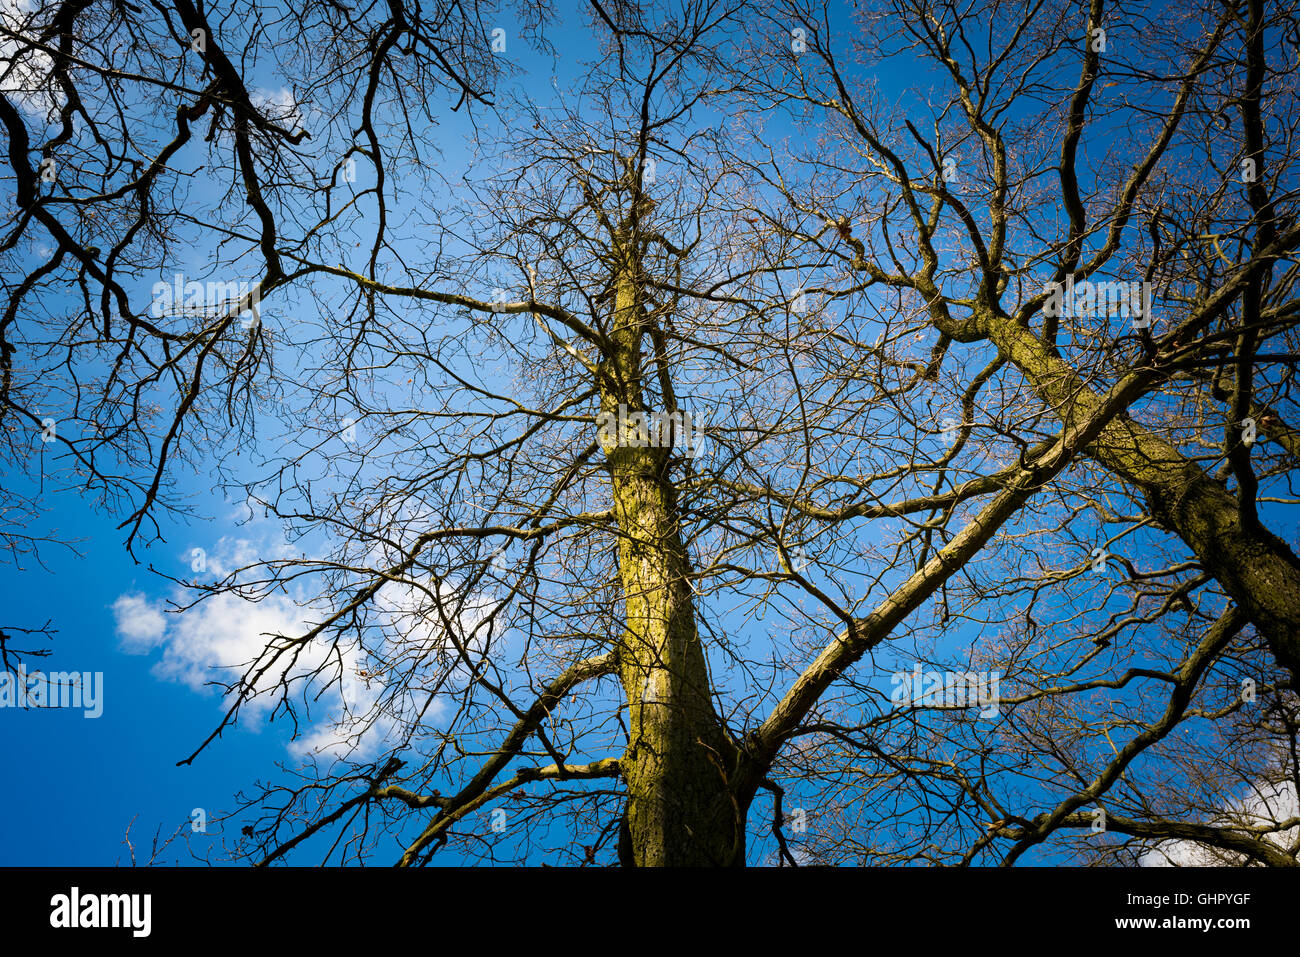 Branches of a tree without leaves on a background of blue sky Stock Photo